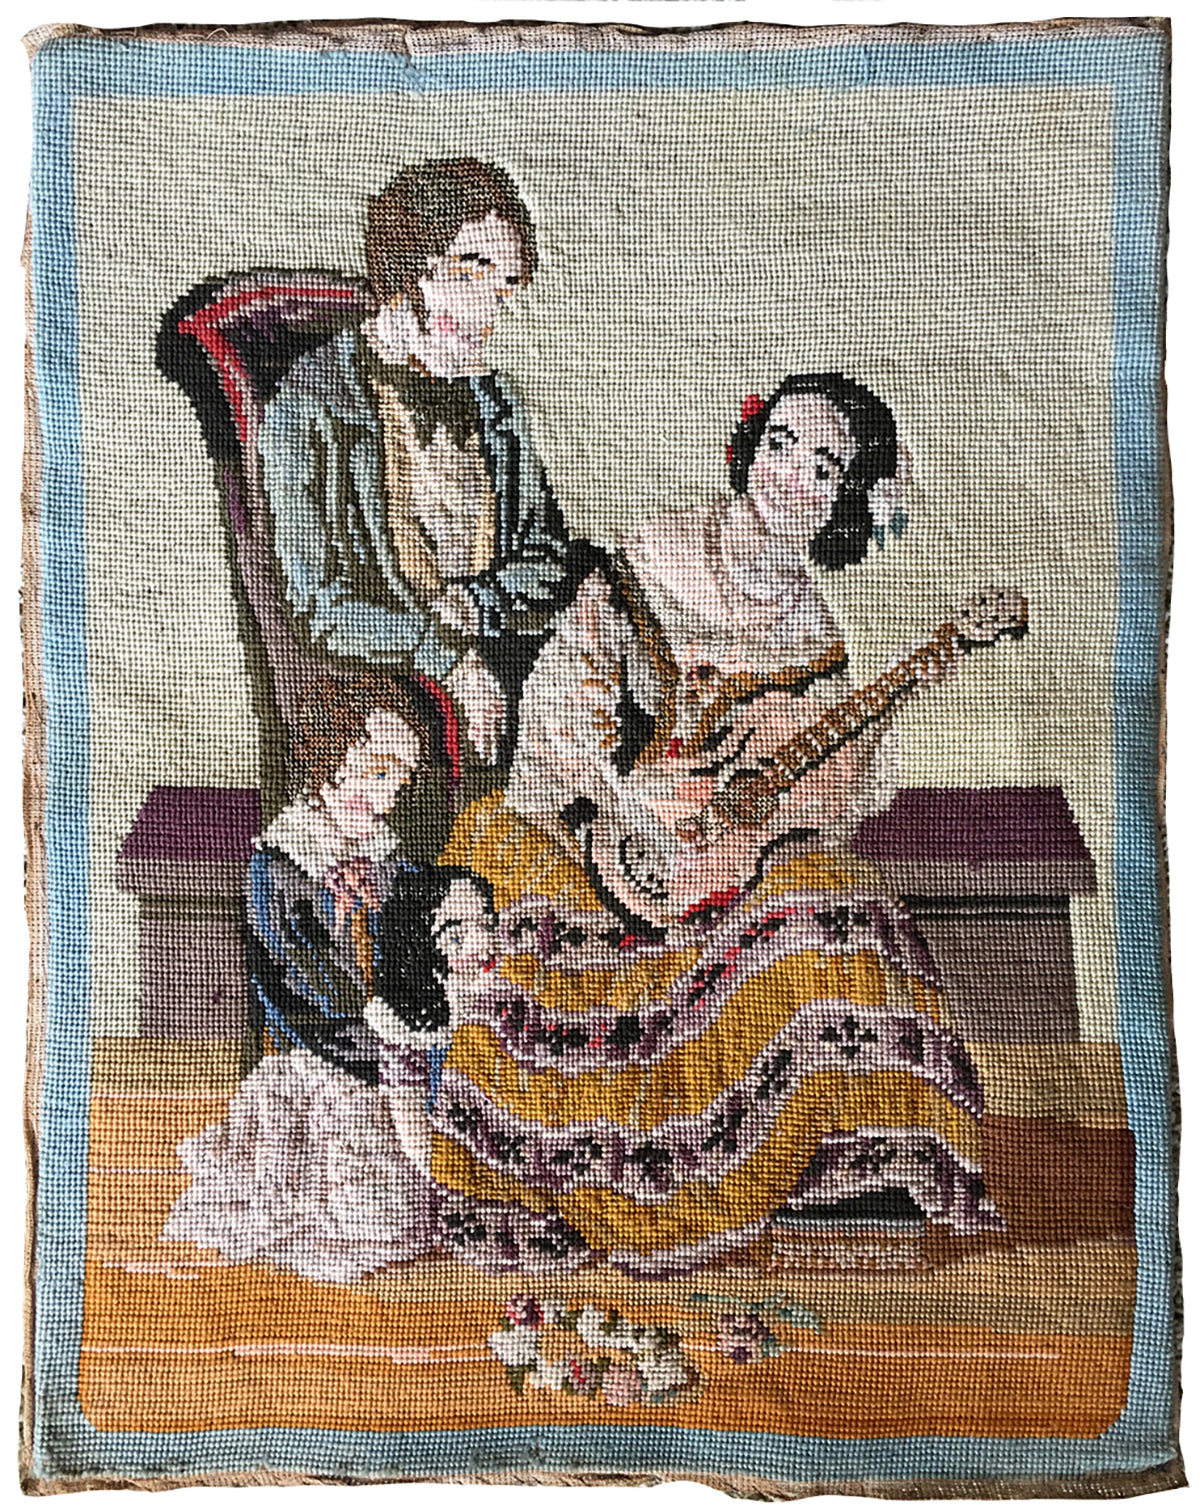 Antique French 23" x 18.5" Needlepoint Sampler, Family and Guitar c. 1830-70s for Pillow or Frame